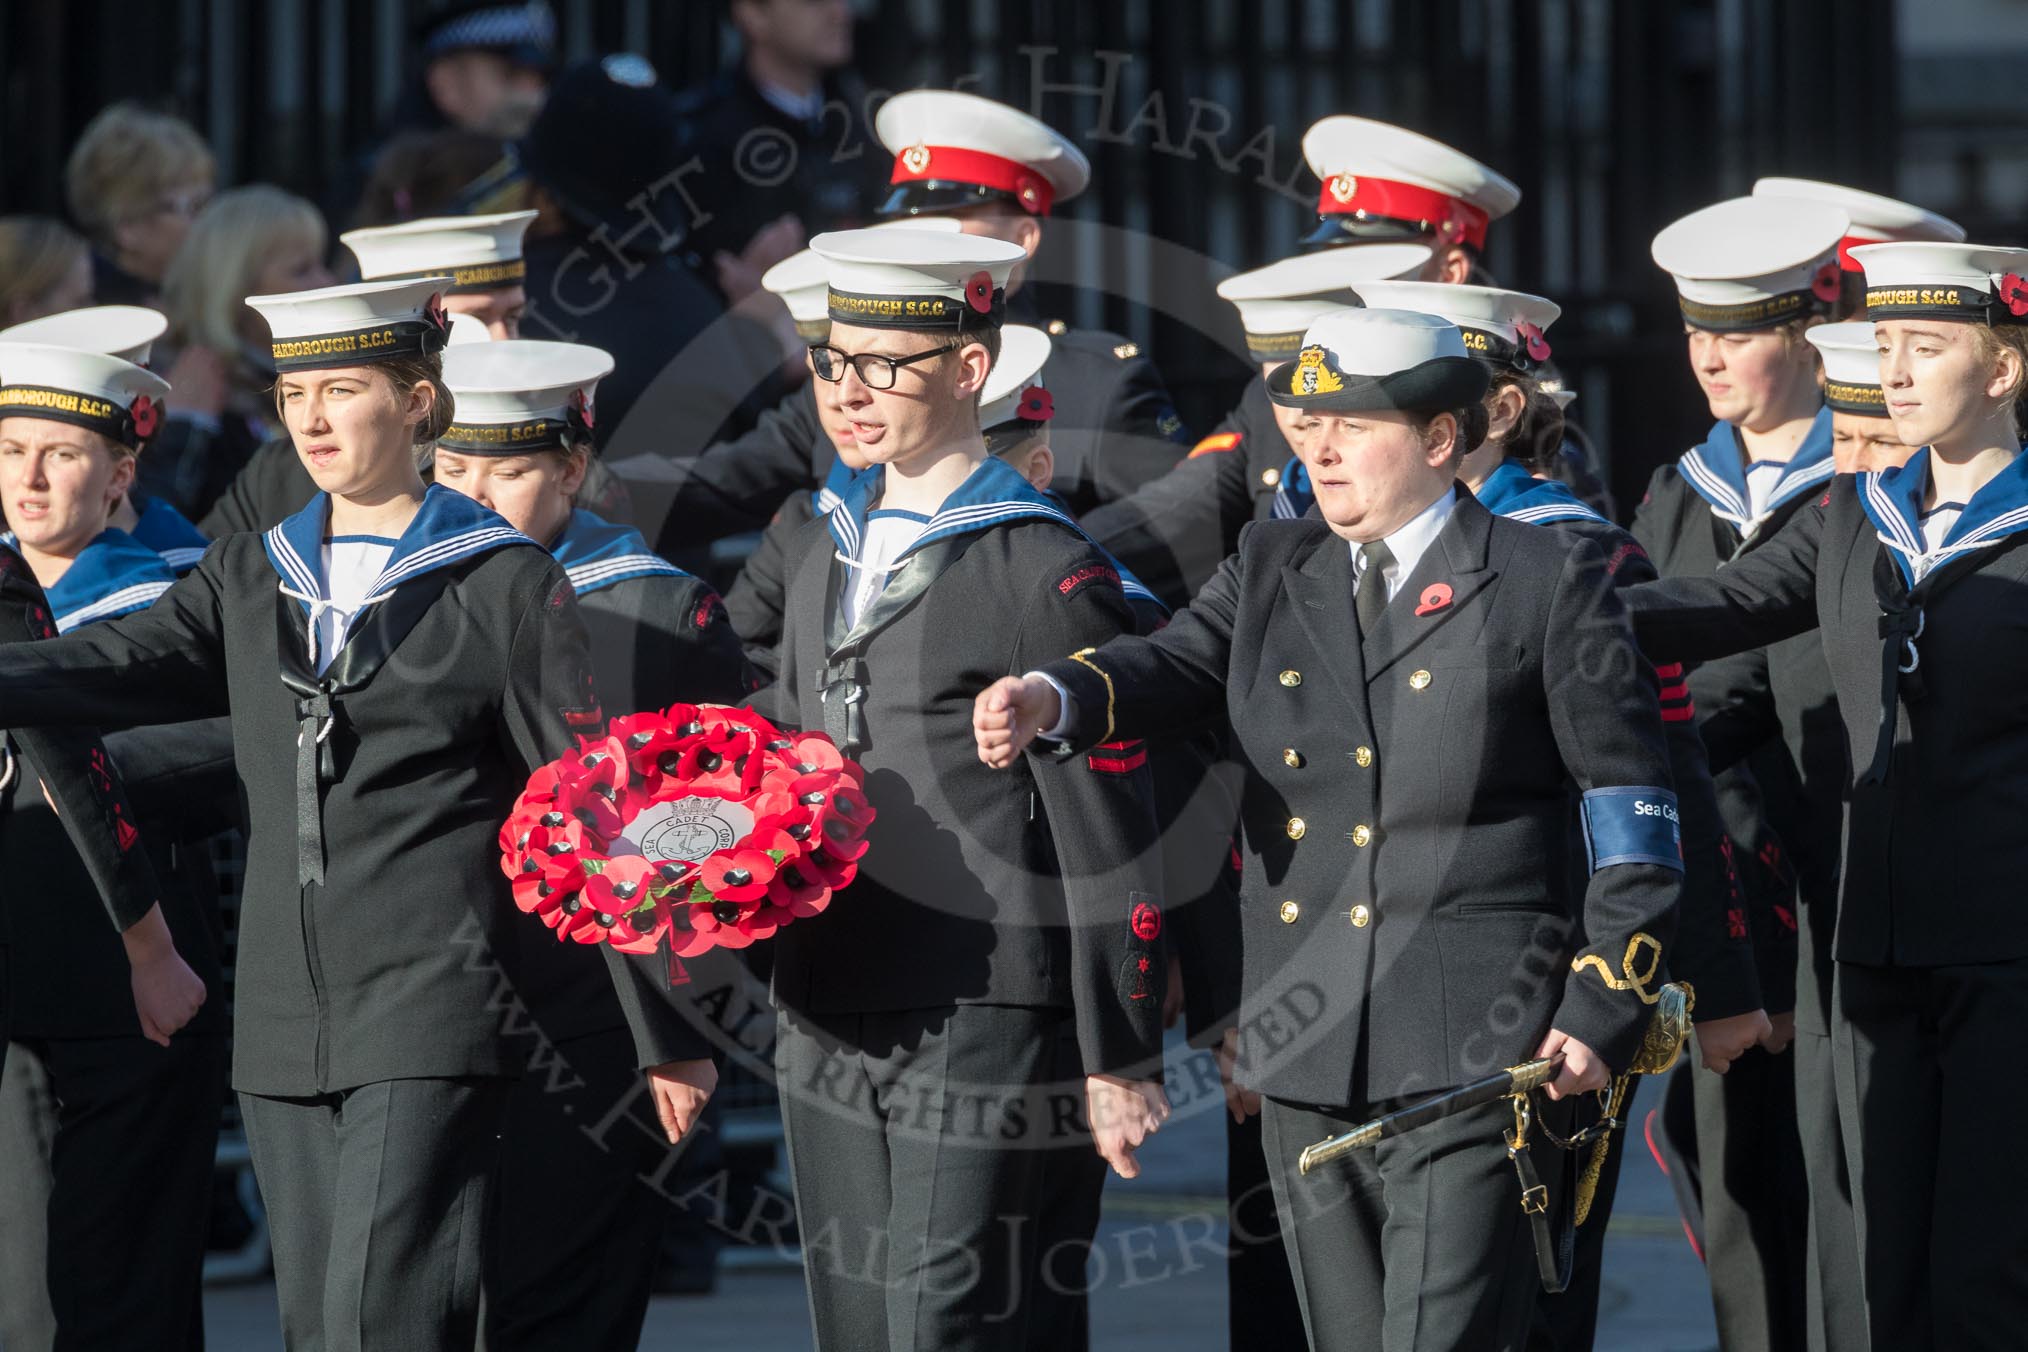 March Past, Remembrance Sunday at the Cenotaph 2016: M32 Army and combined Cadet Force.
Cenotaph, Whitehall, London SW1,
London,
Greater London,
United Kingdom,
on 13 November 2016 at 13:17, image #2790